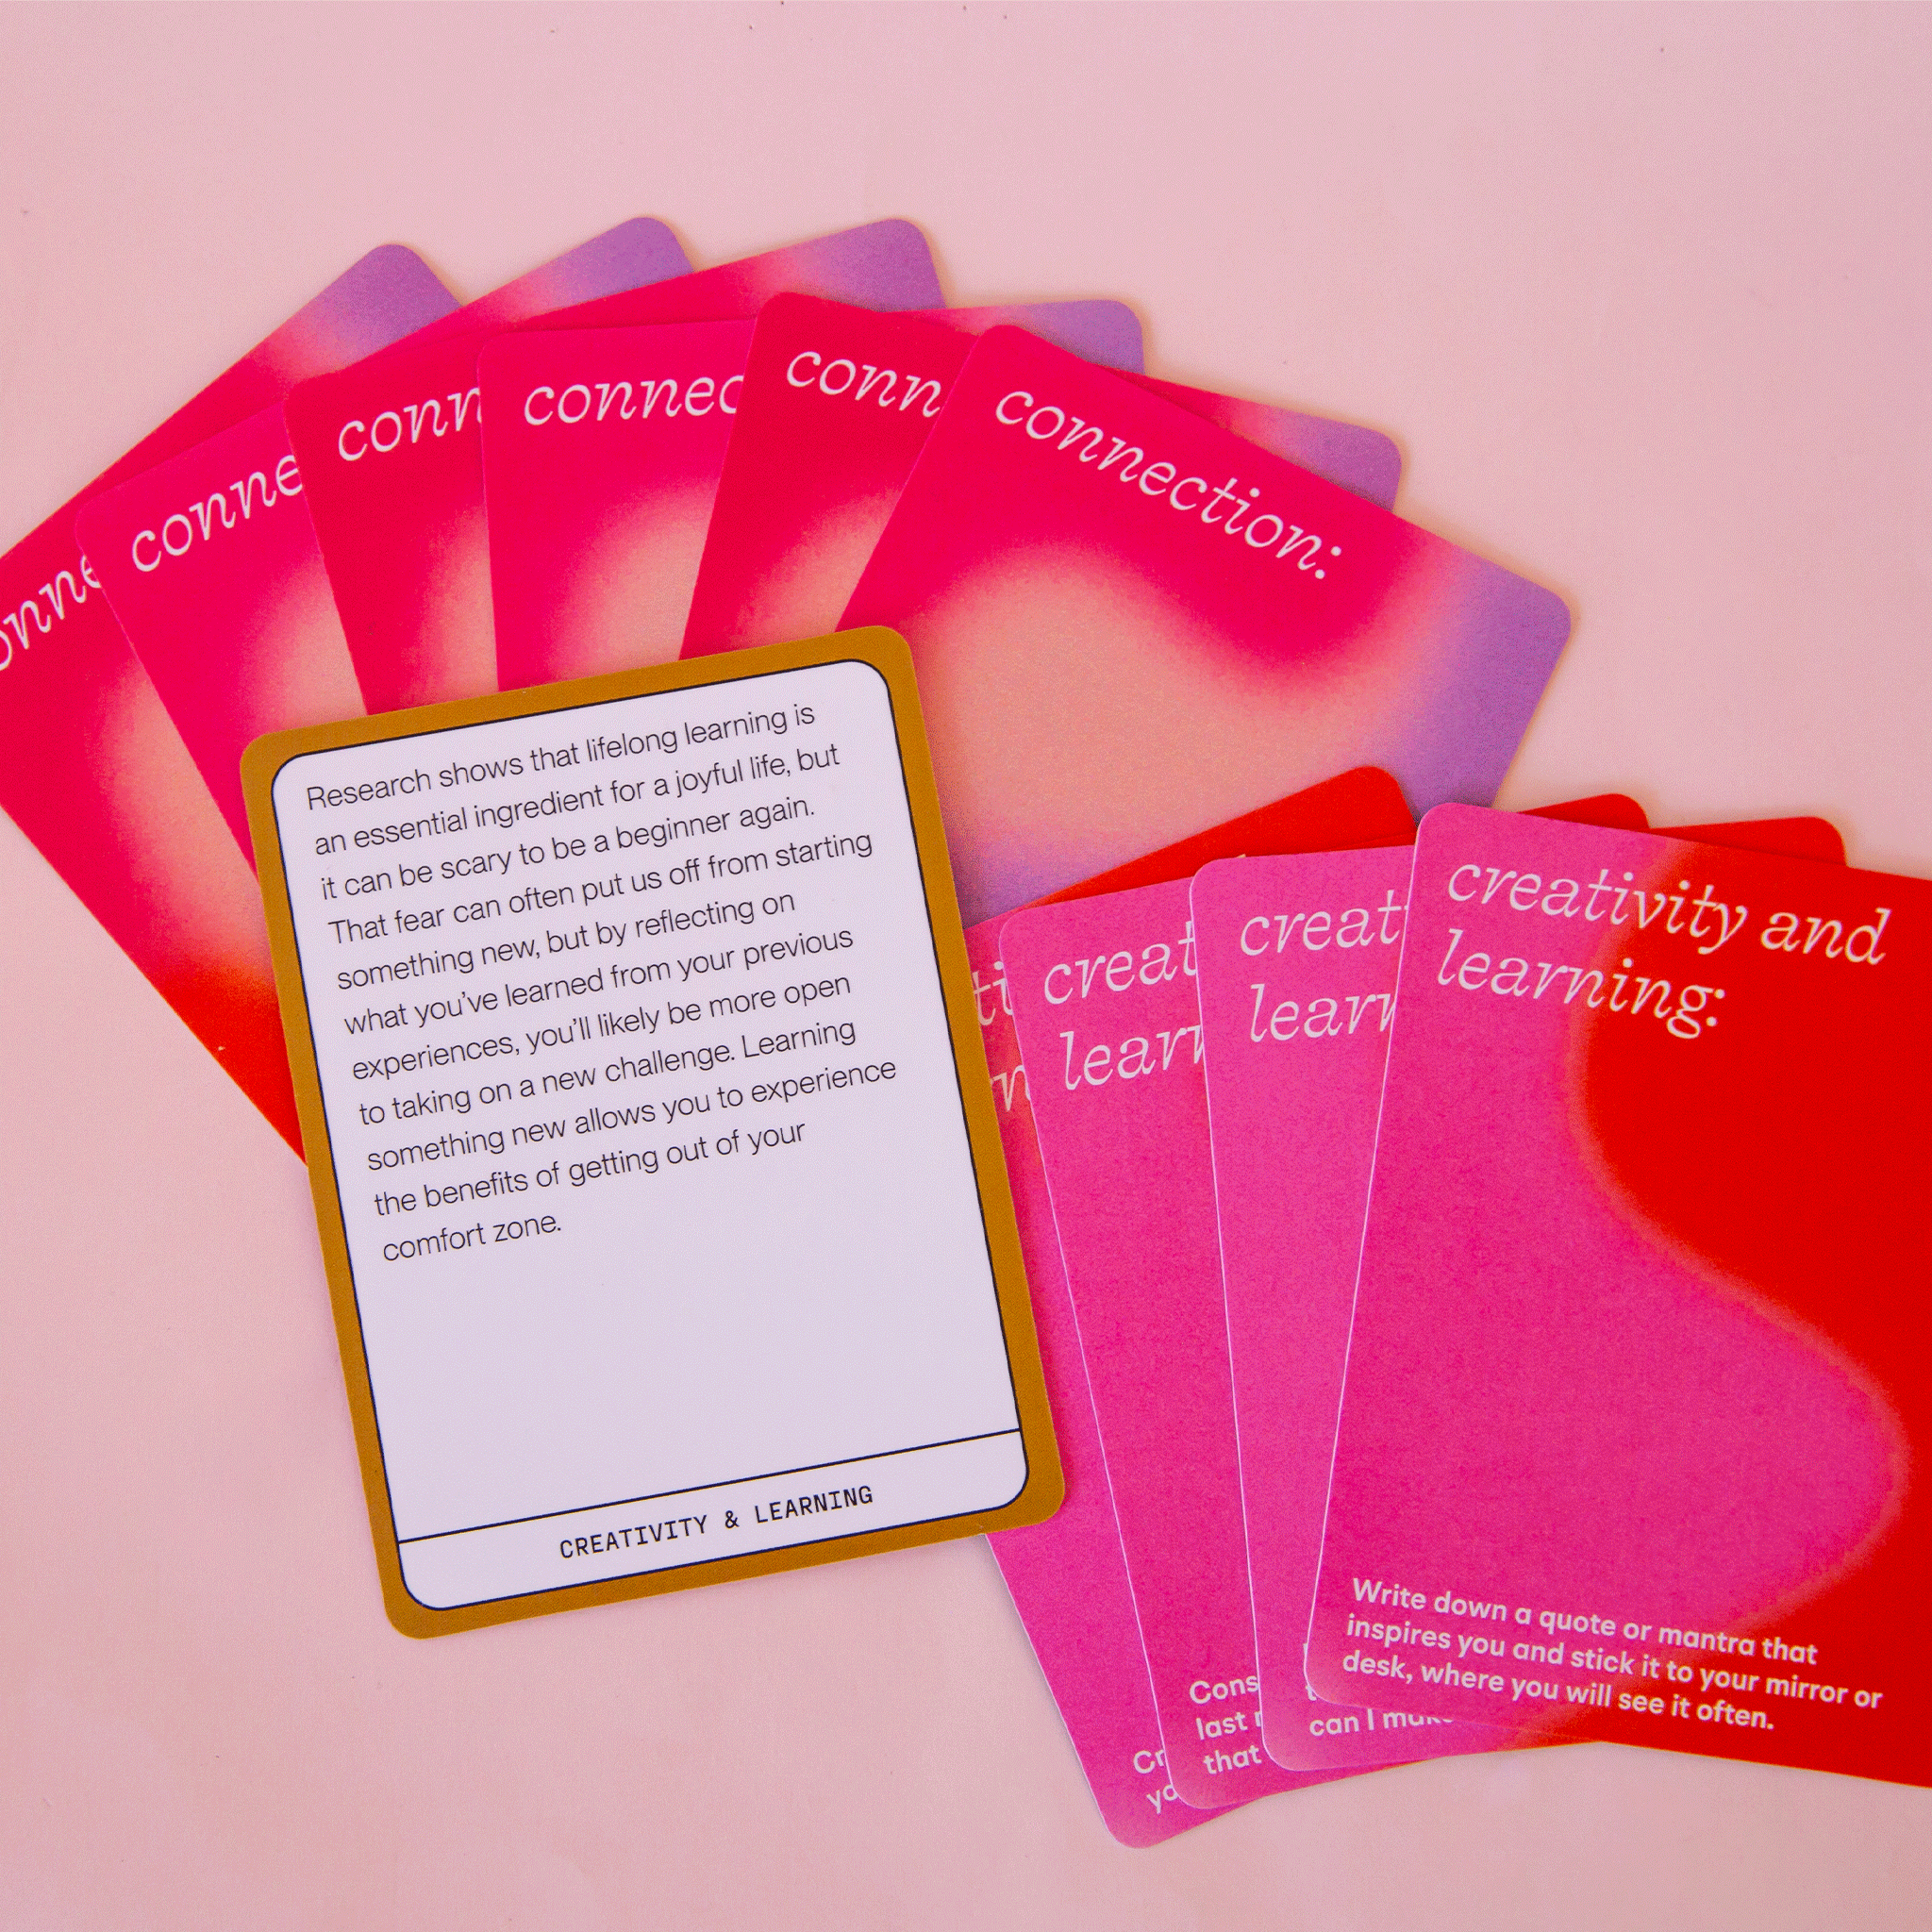 On a pink background is a deck of cards with inspirational quotes on one side and a wavy colorful design on the other. 